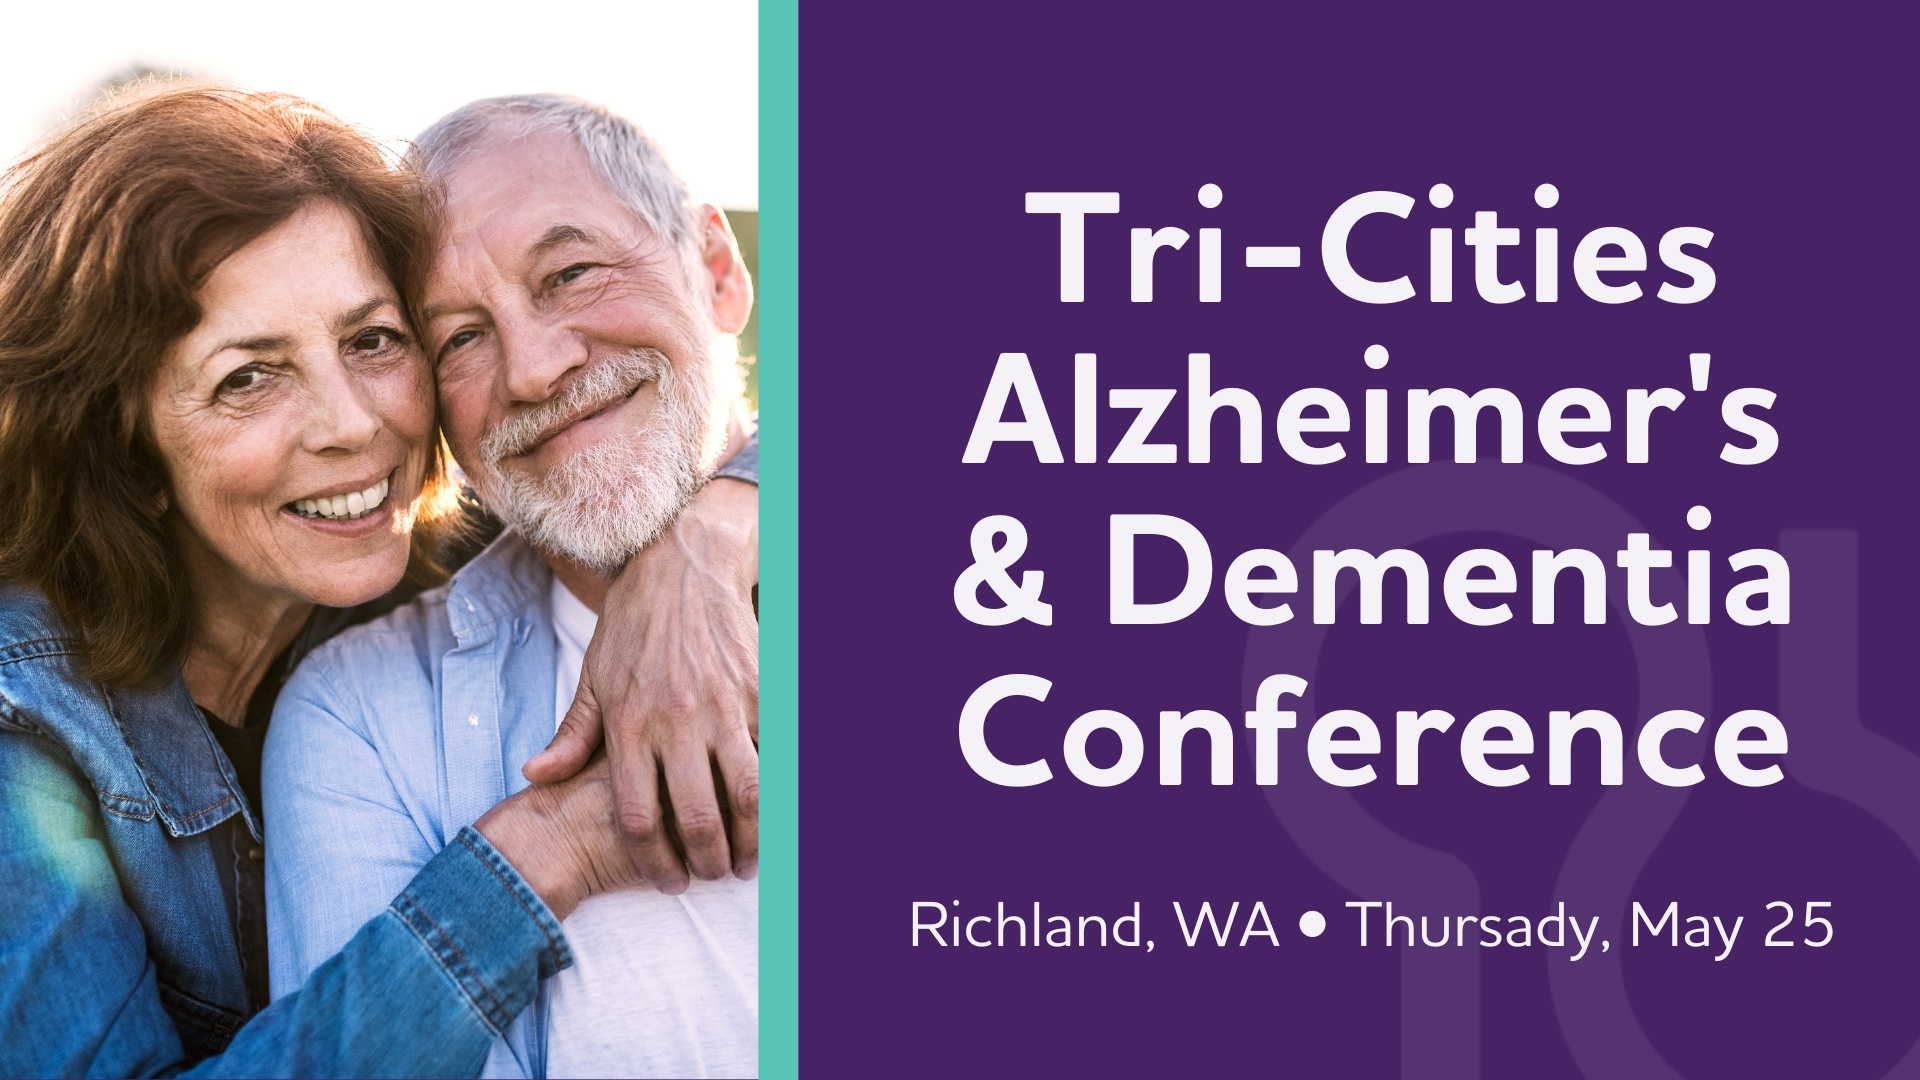 Tri-Cities-Alzheimers-Dementia-Conference-Facebook-Event-Cover.jpg